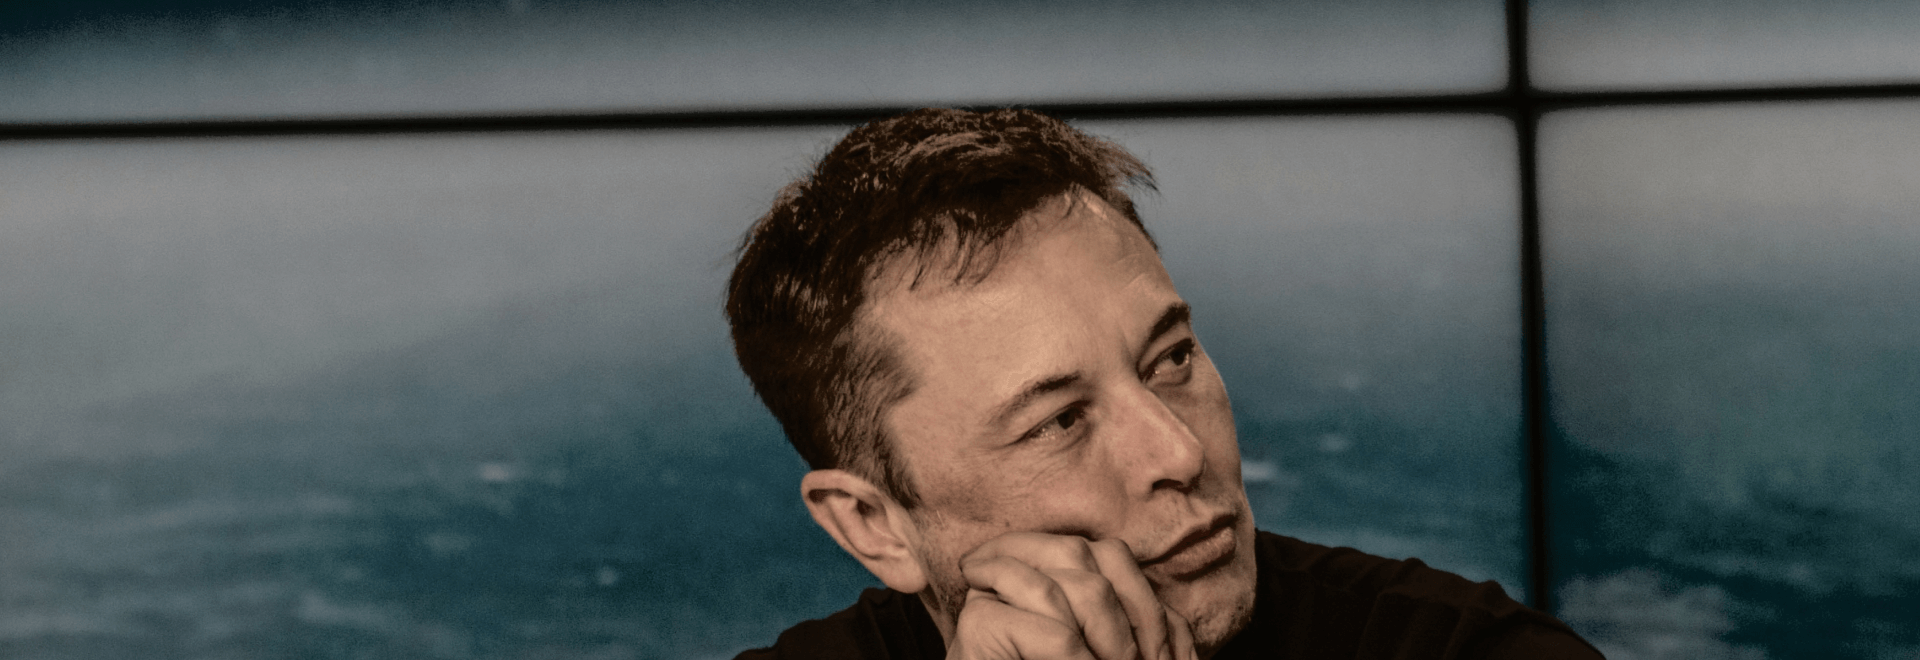 Online reactions to Elon Musk’s SNL appearance